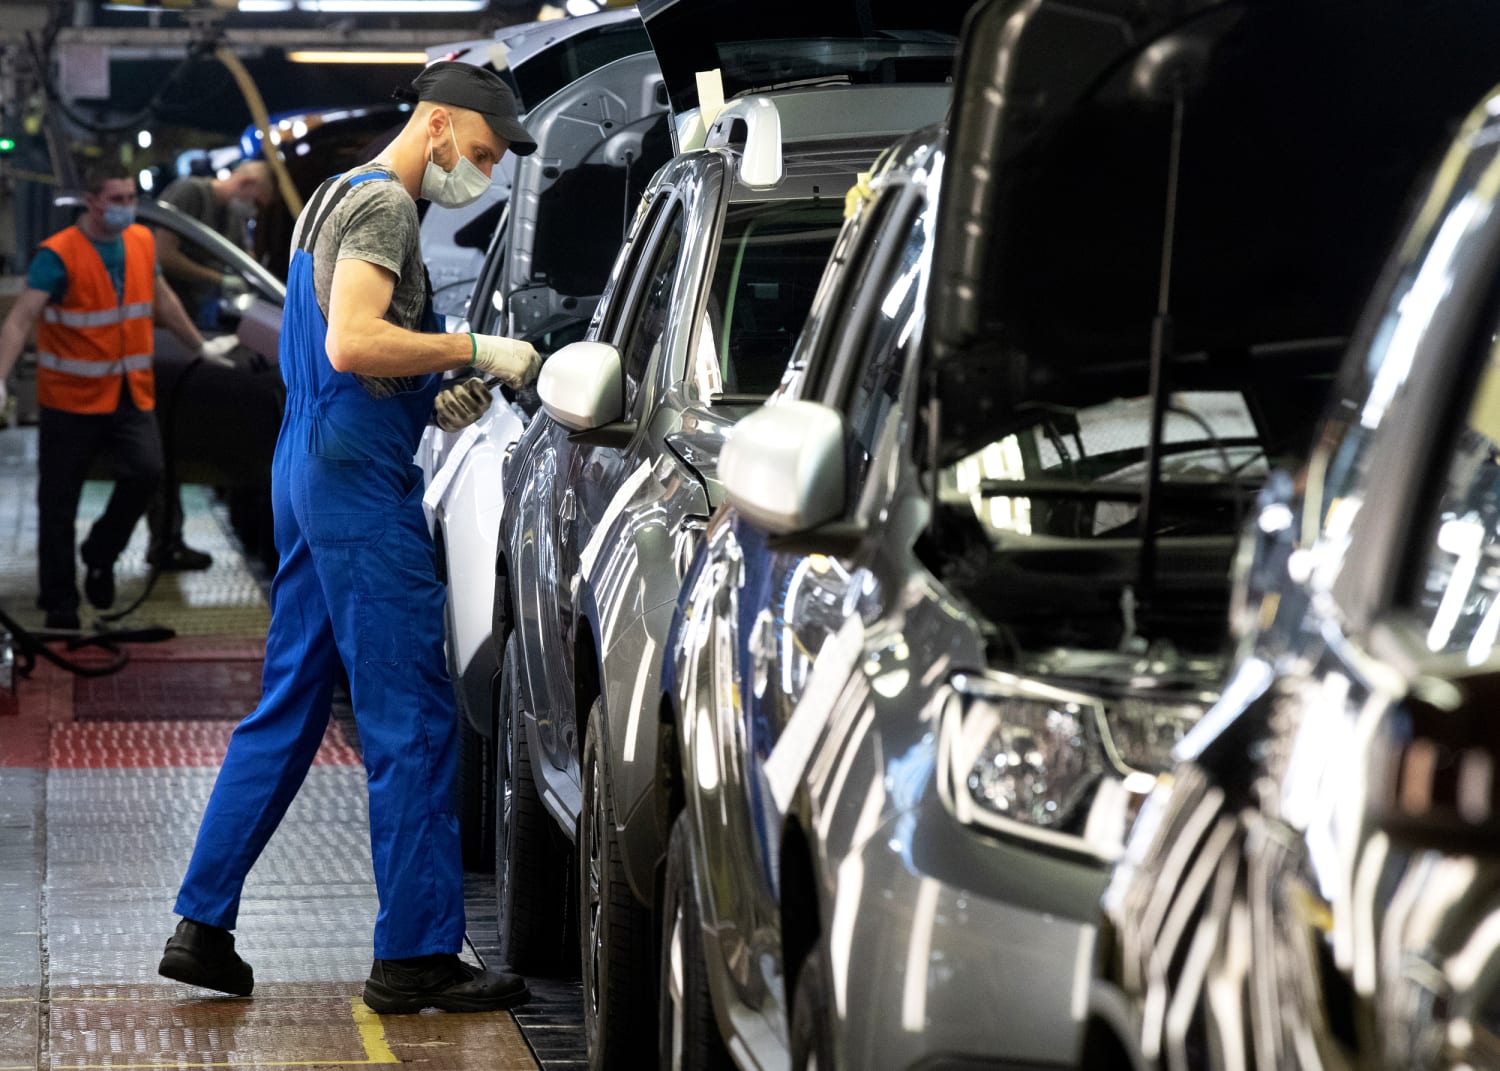 Ukraine crisis could create more woes for auto industry